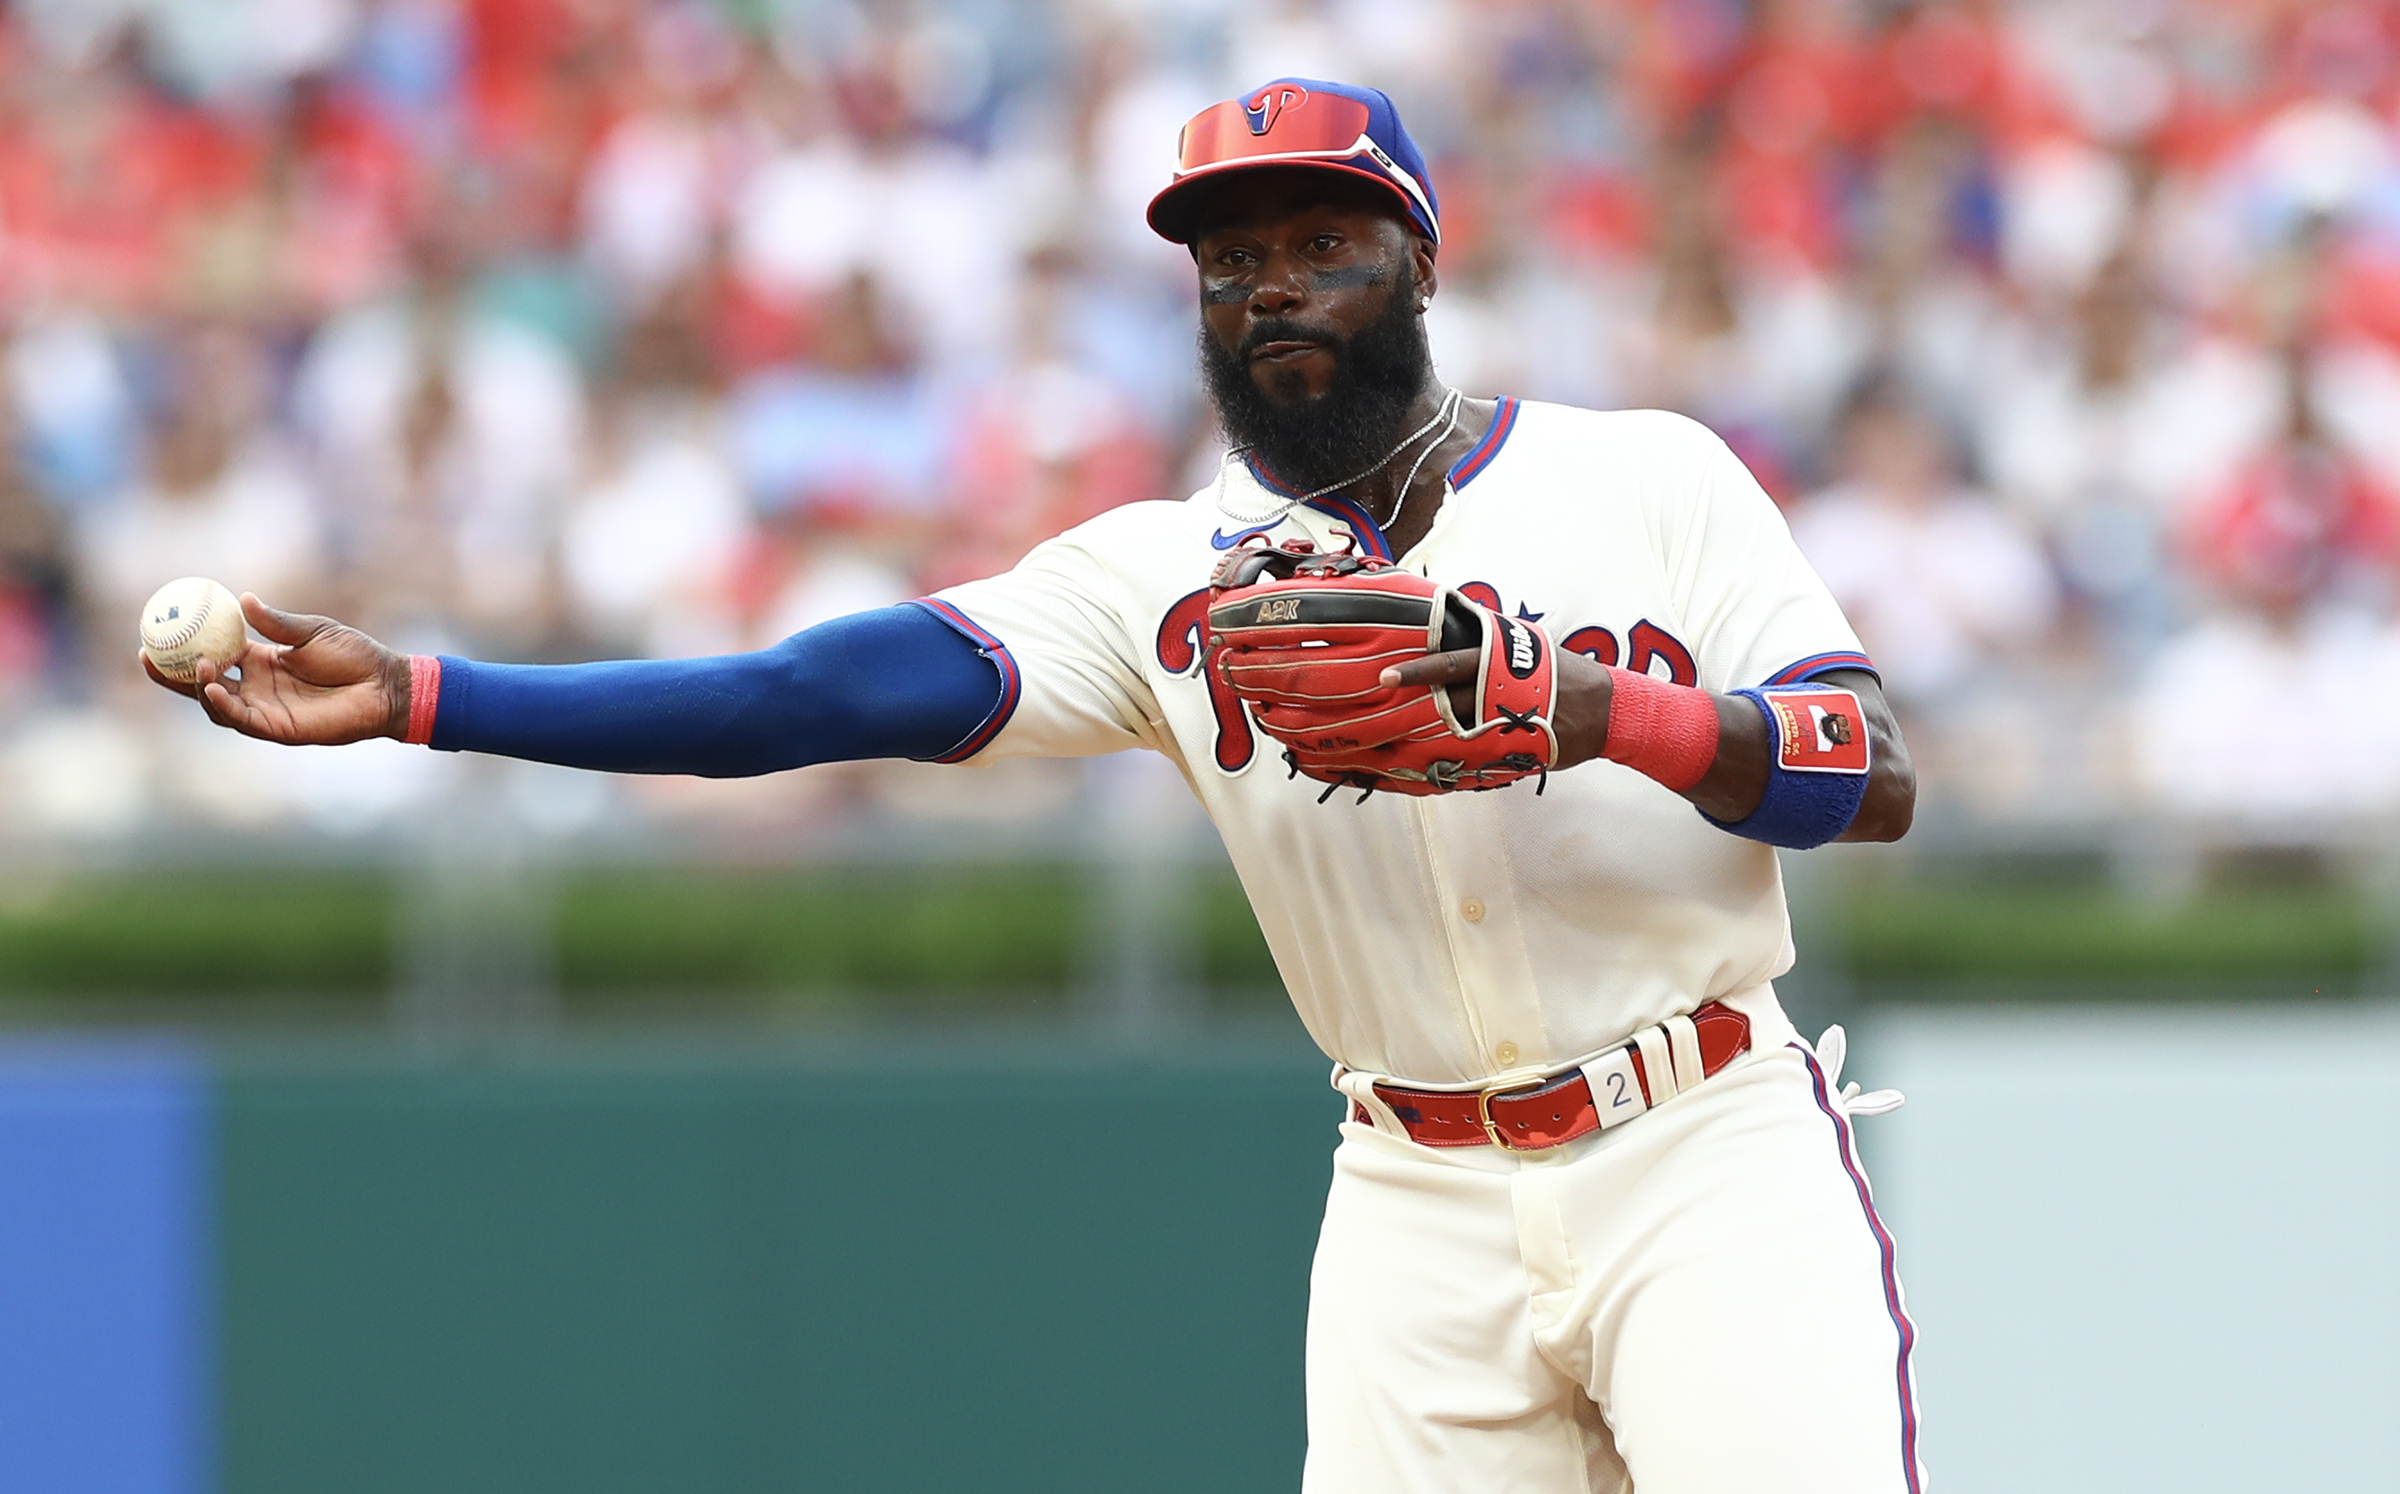 Josh Harrison, you are a Phillie! Phillies 7, White Sox 4 - The